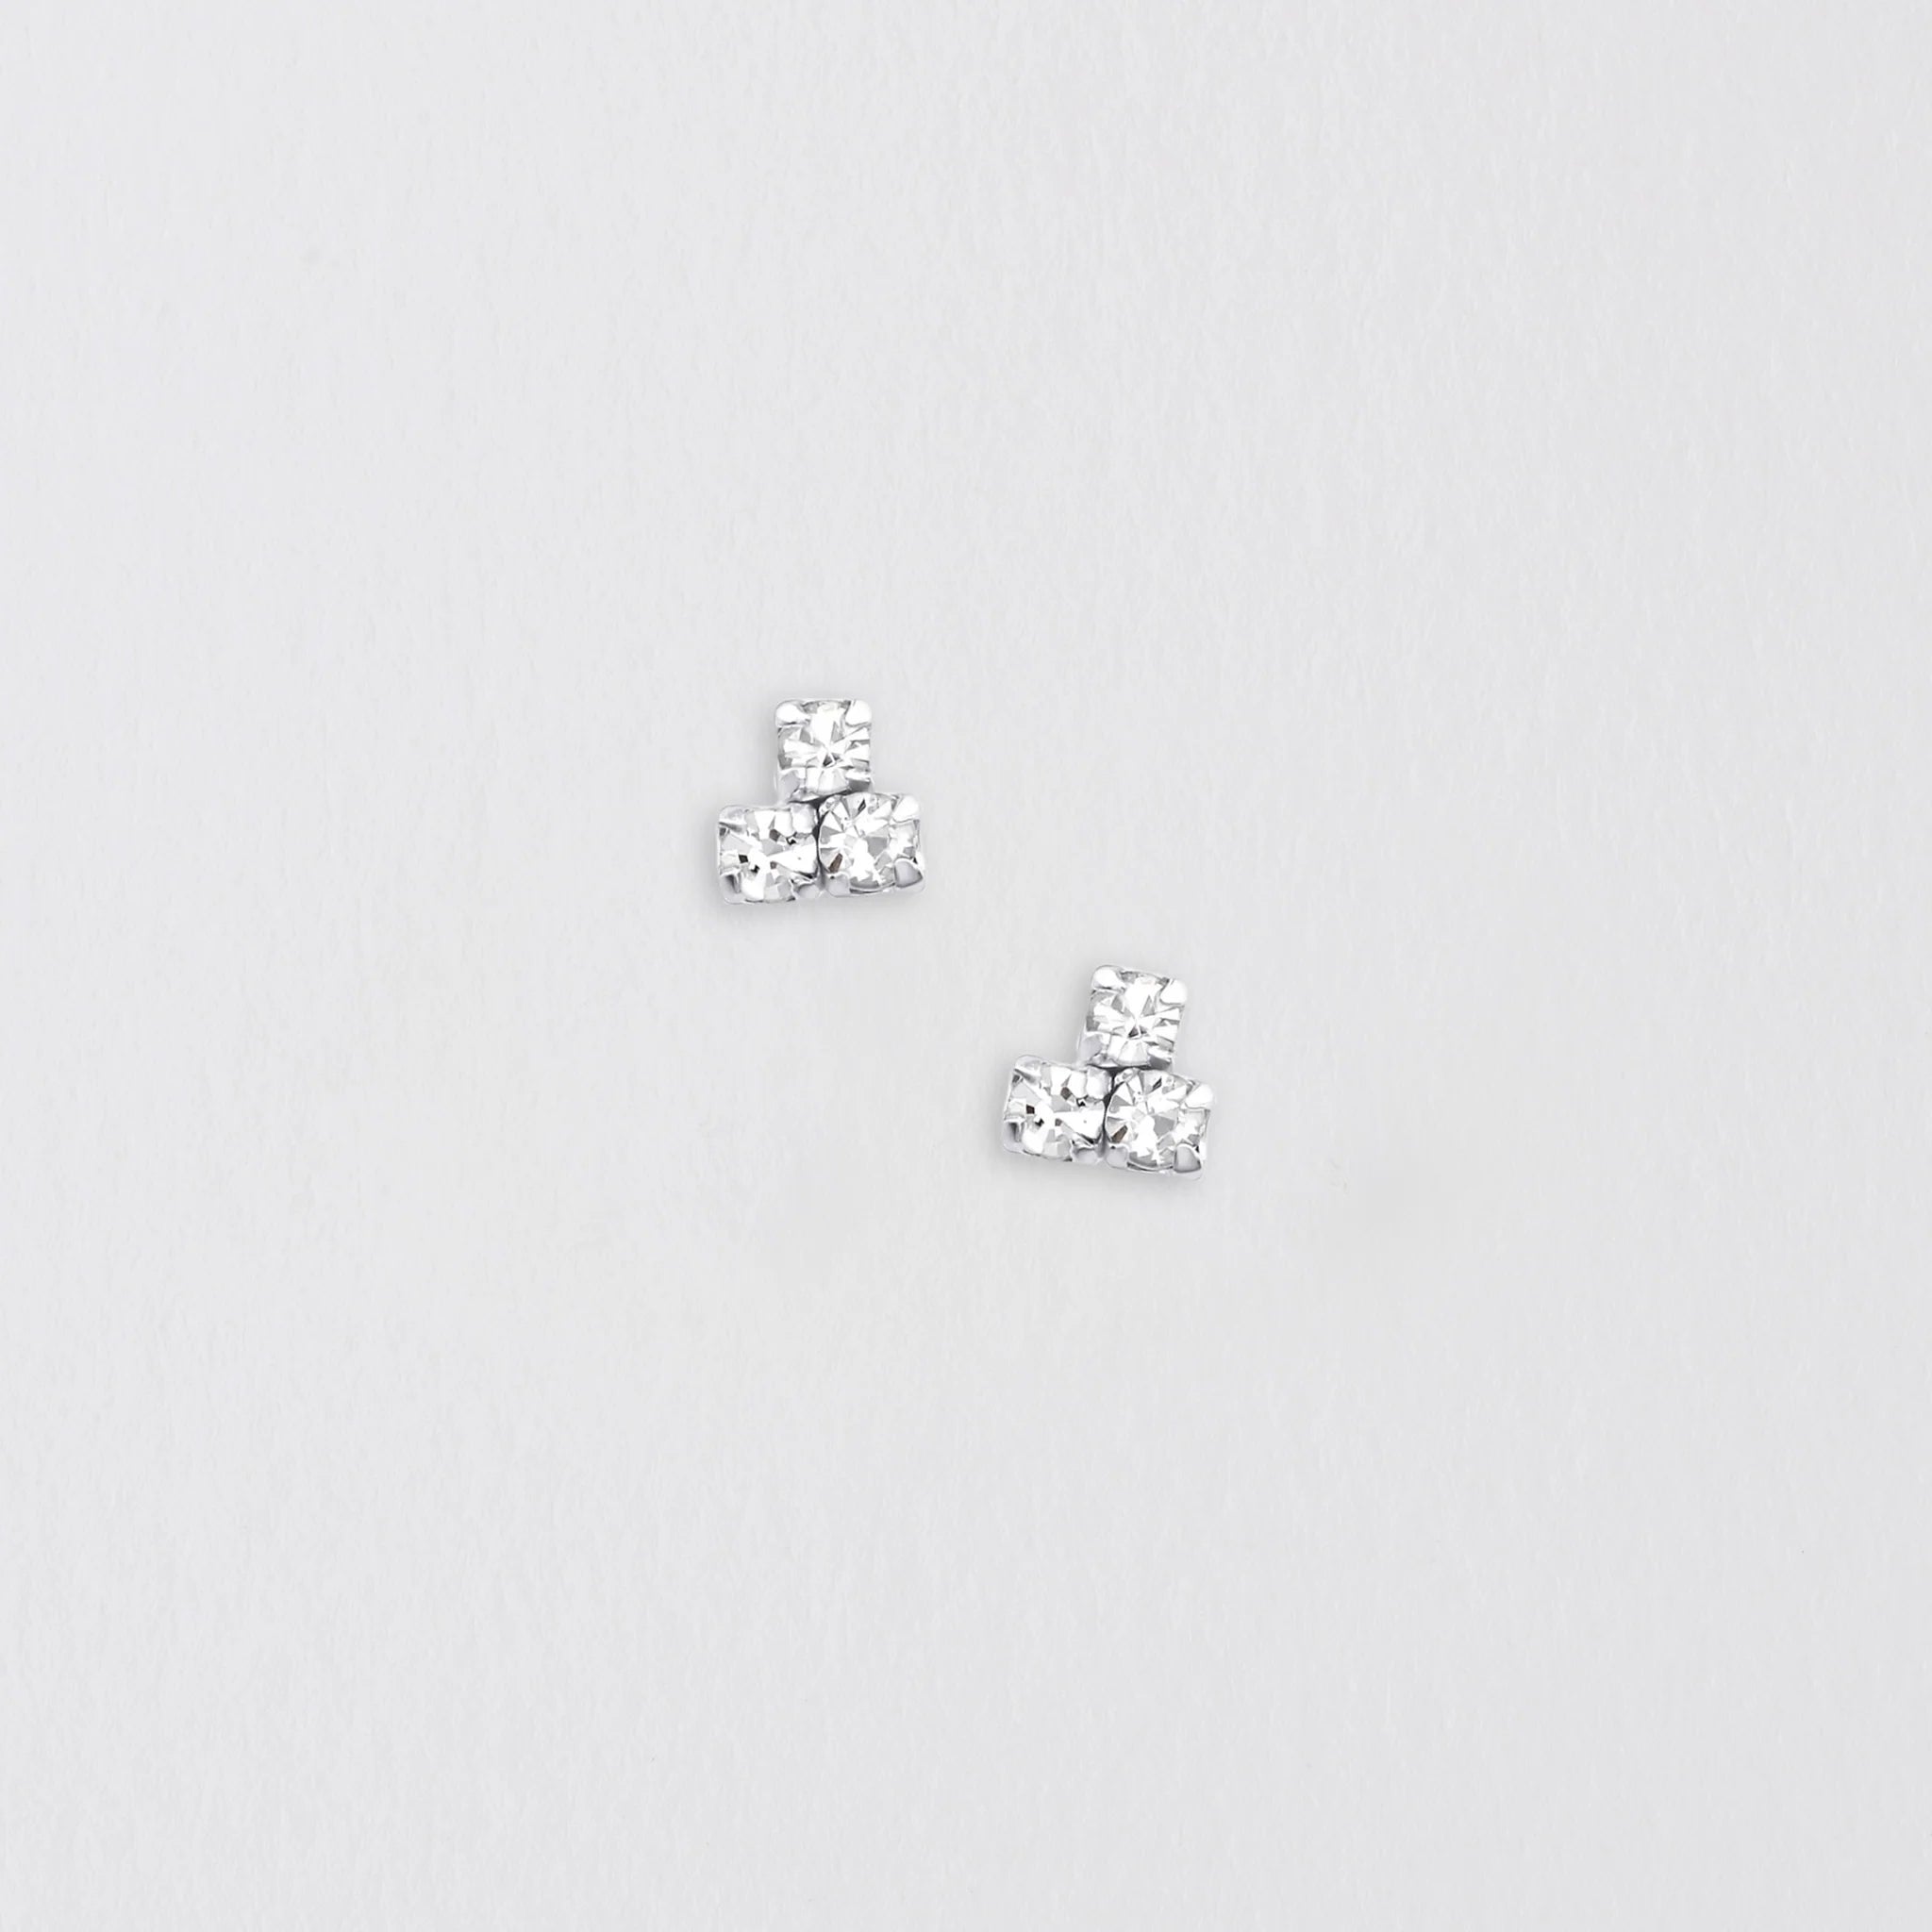 Crumble & Core | Sending Love Card with Earrings in a White Box by Weirs of Baggot Street